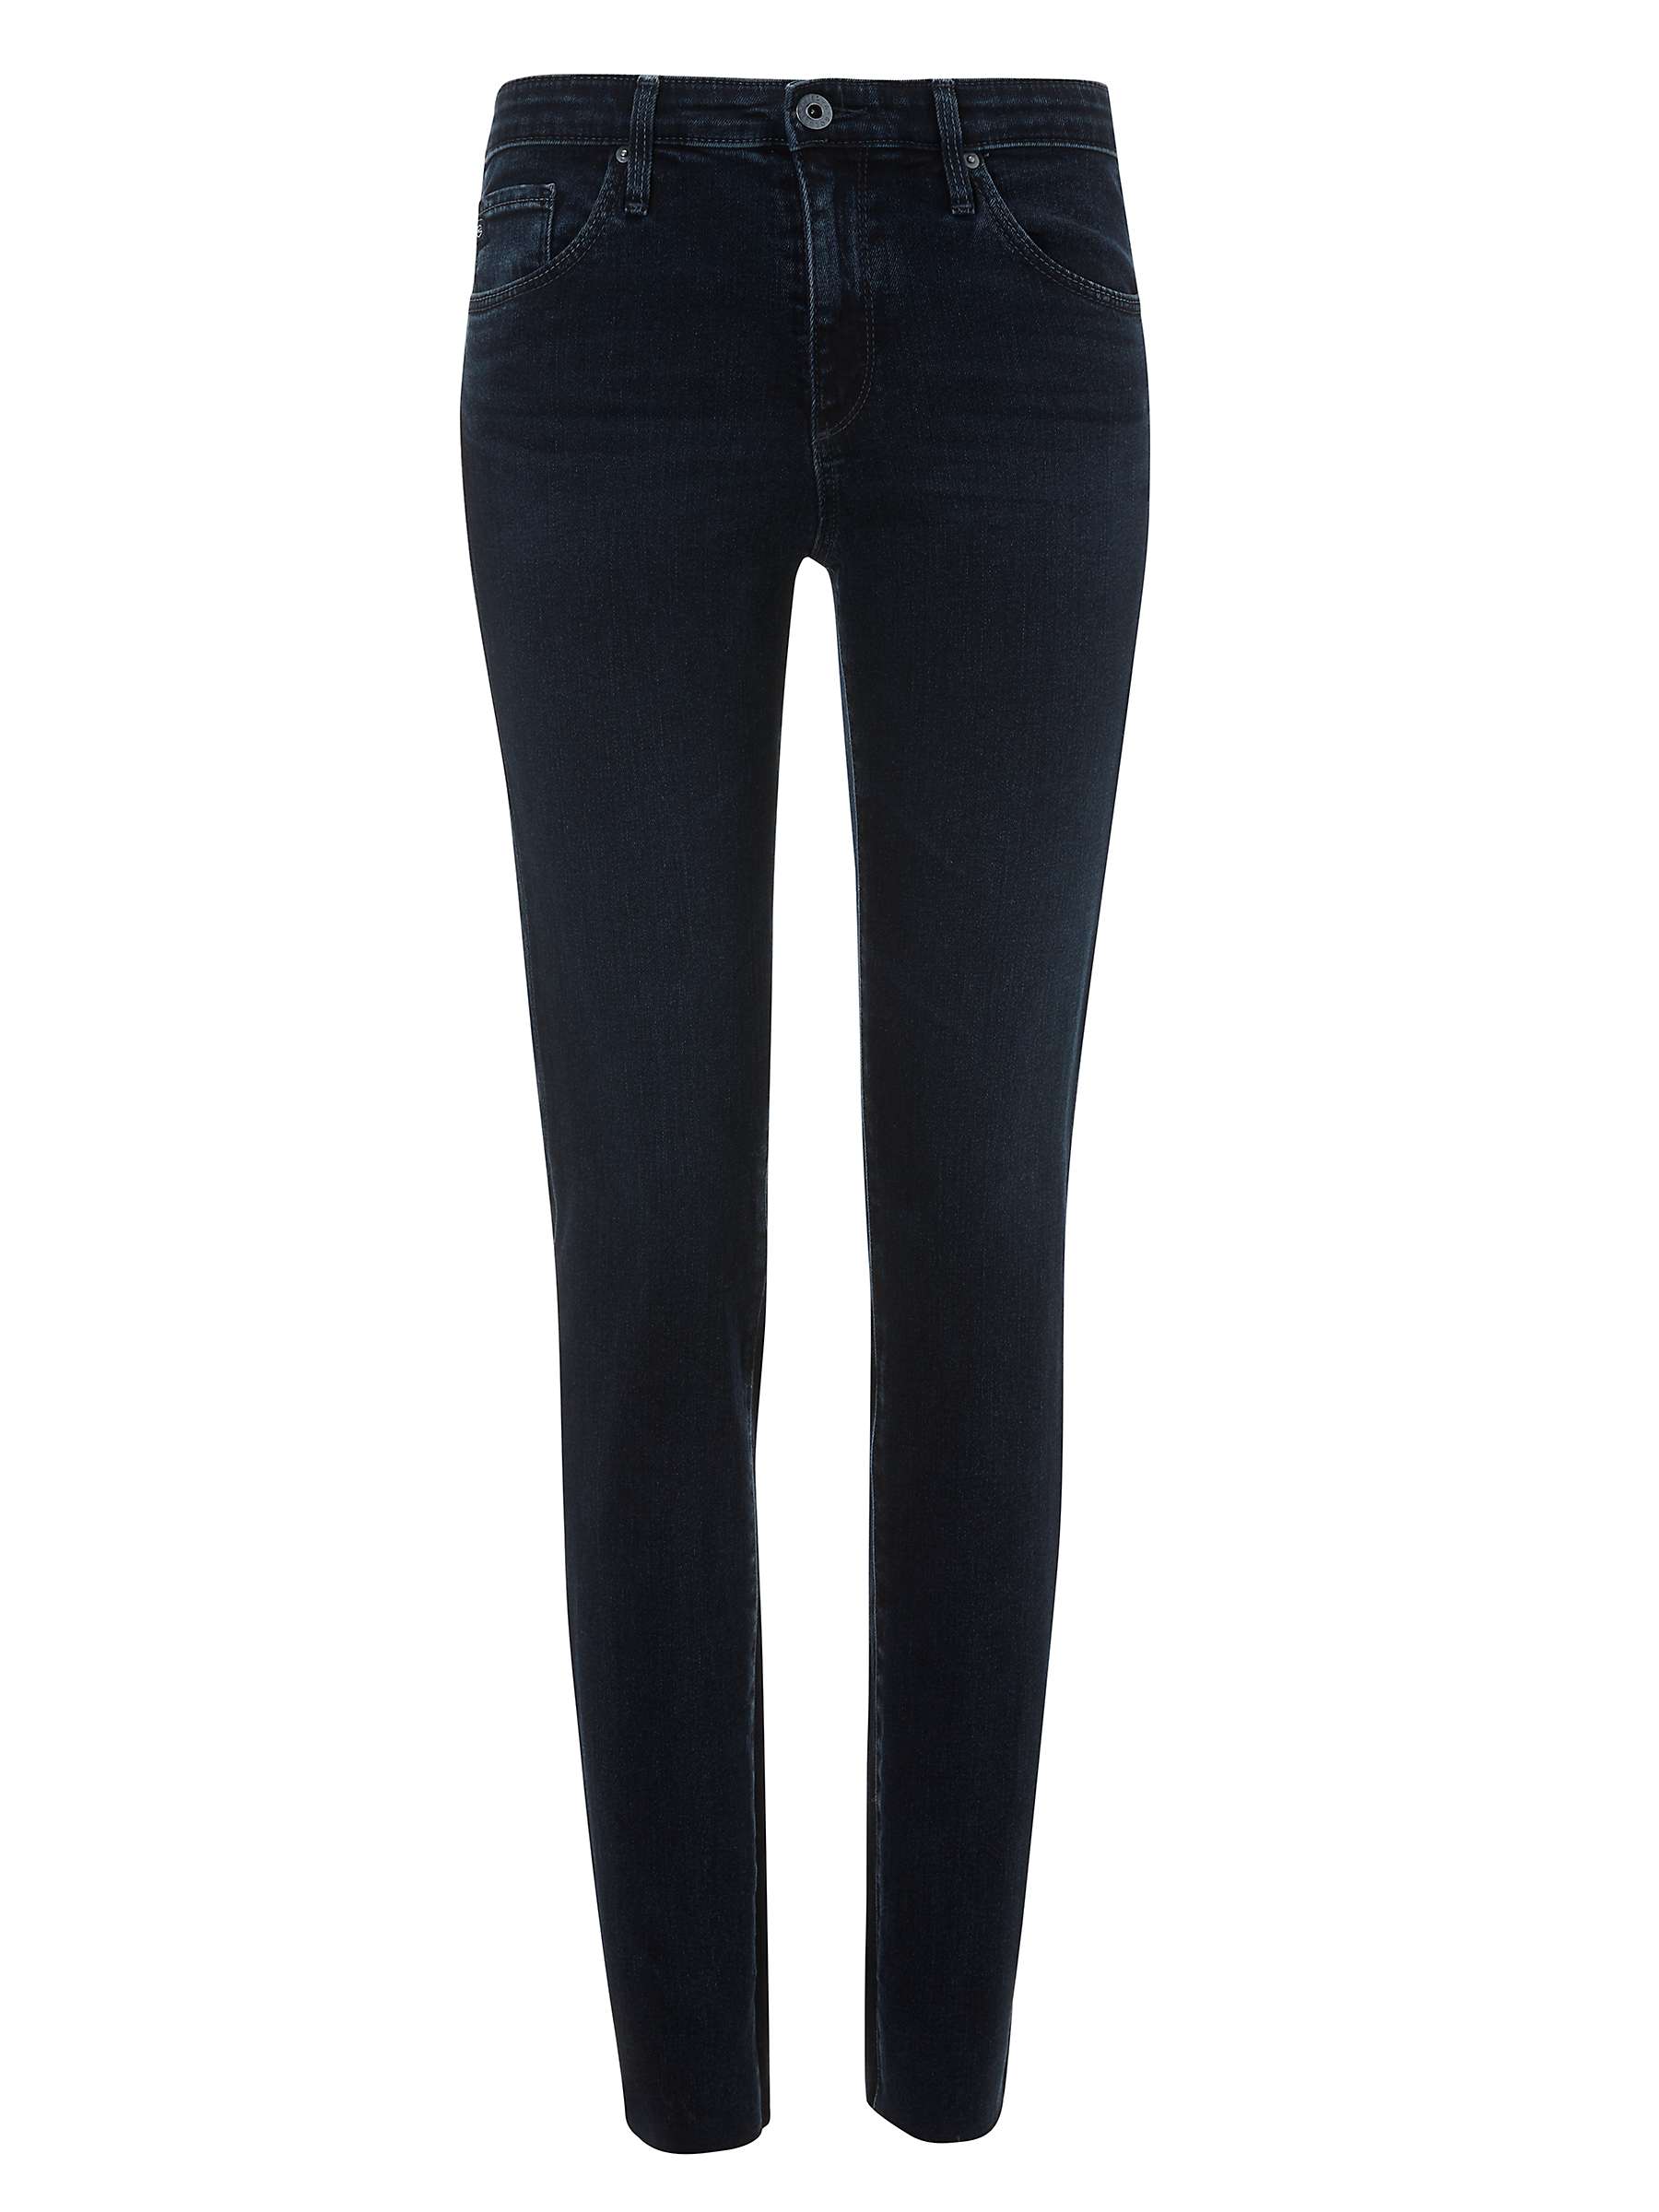 Buy AG The Prima Mid Rise Skinny Ankle Jeans, Yardbird Online at johnlewis.com